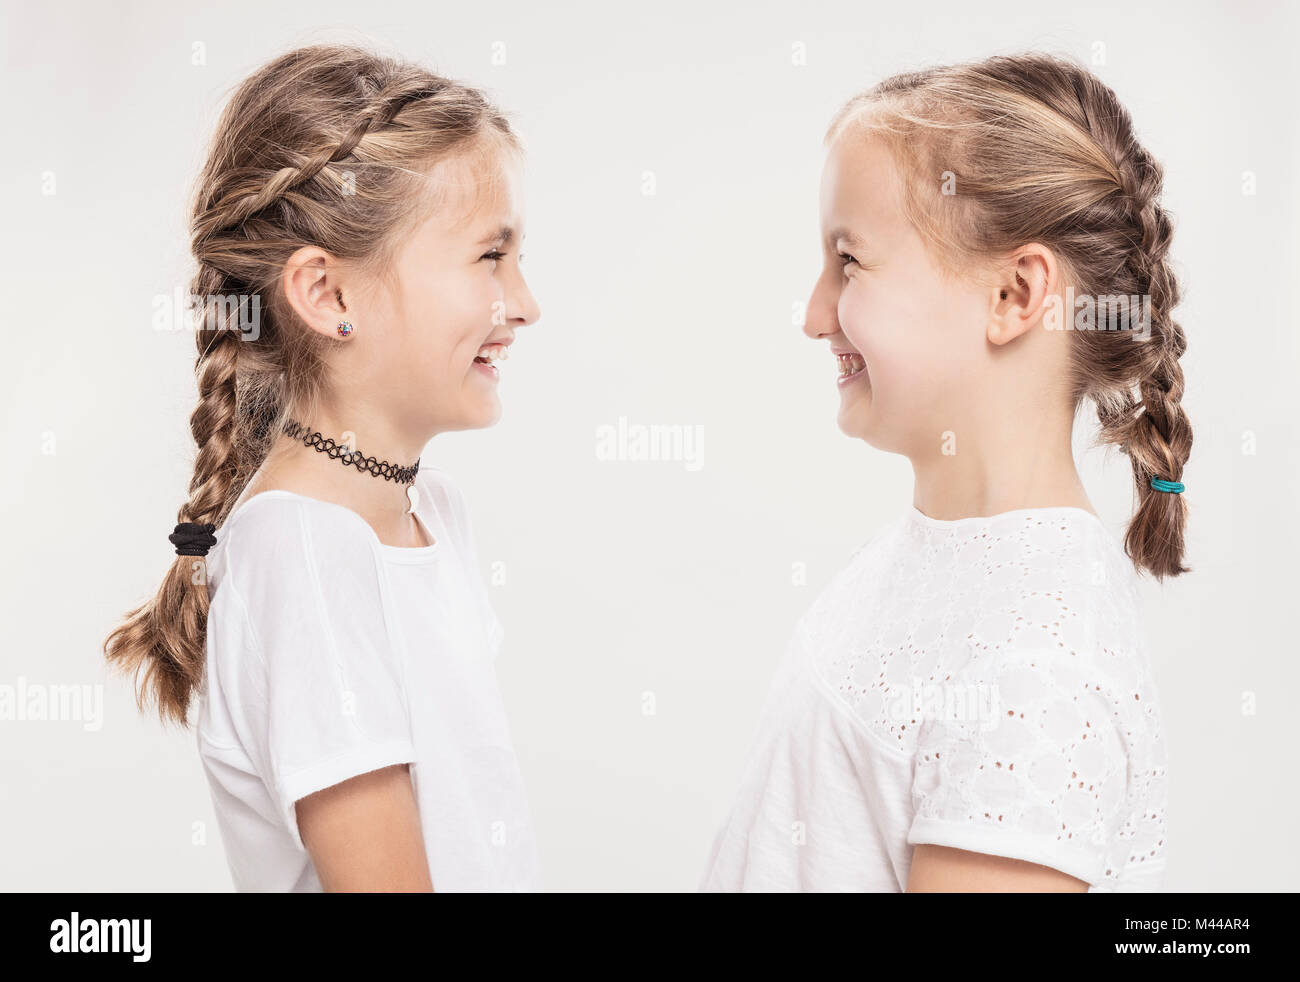 Studio portrait of two girls with hair plaits face to face, head and shoulders Stock Photo